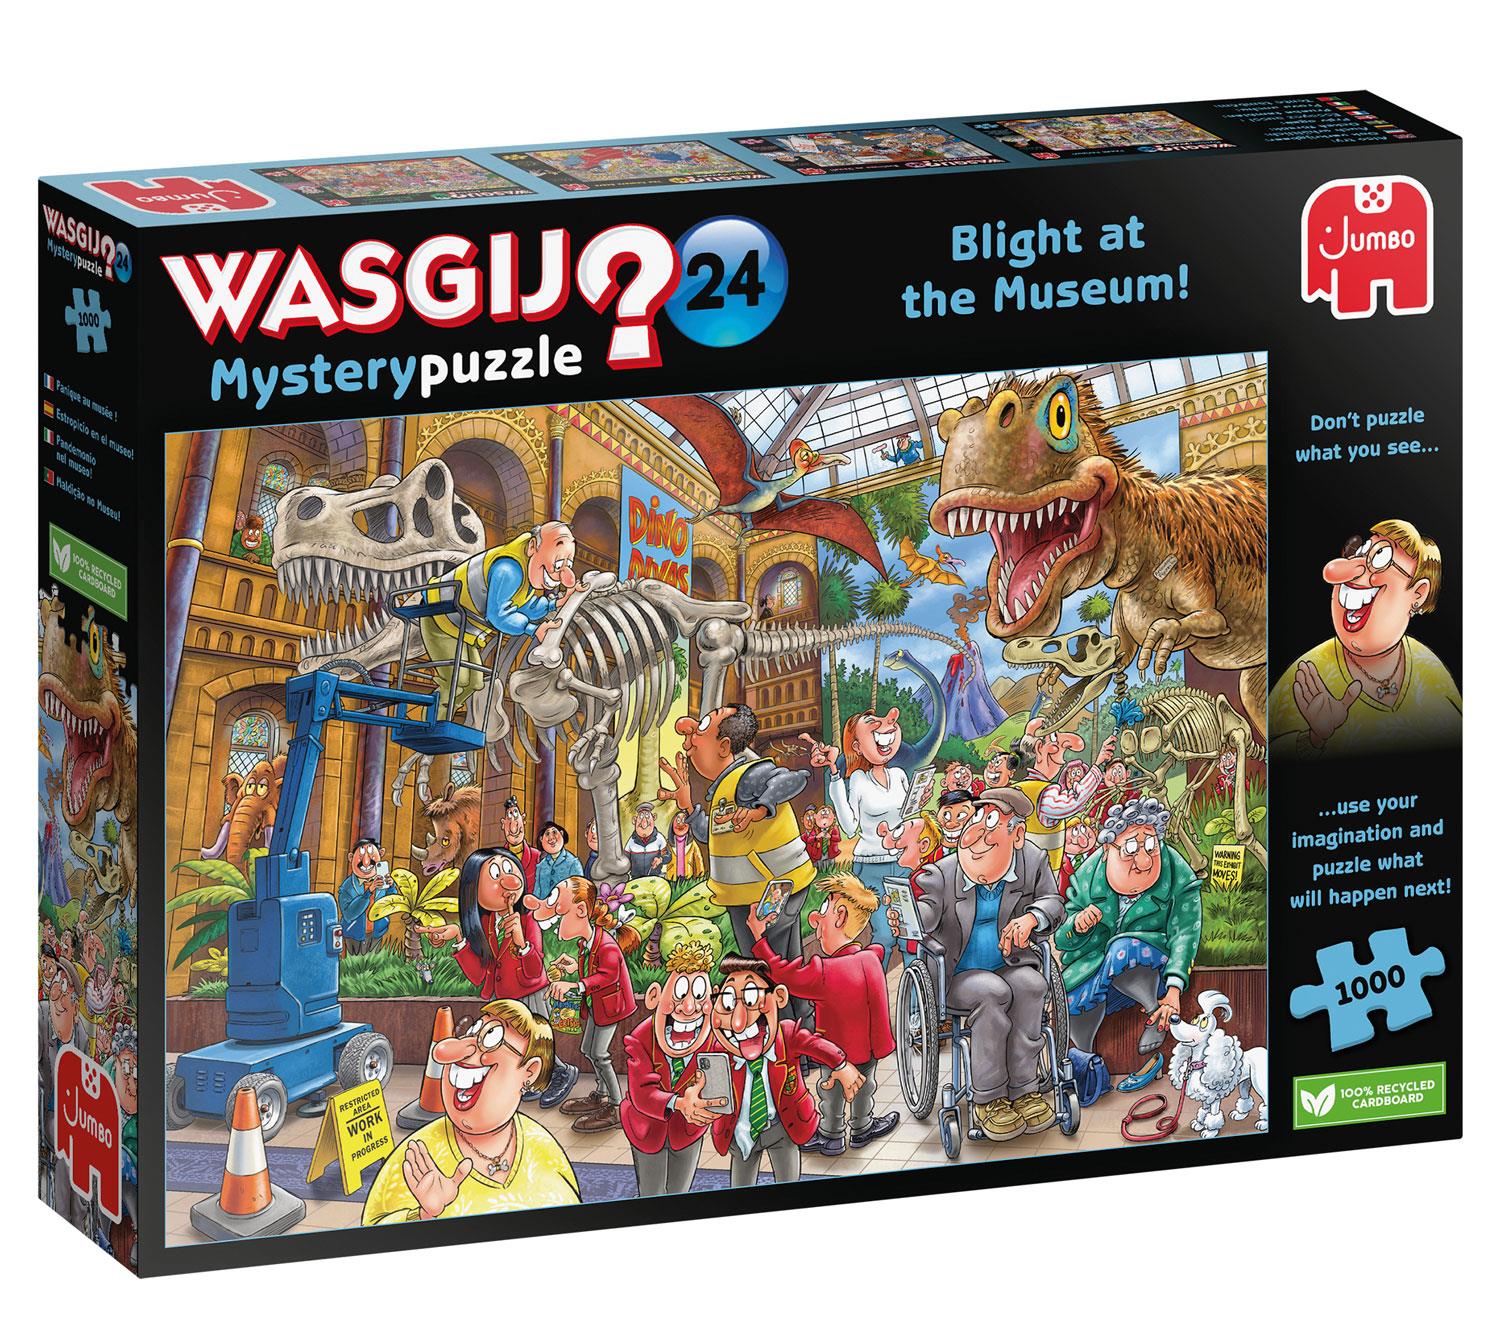 Wasgij Mystery 24 Blight at the Museum! Jigsaw Puzzle (1000 Pieces)